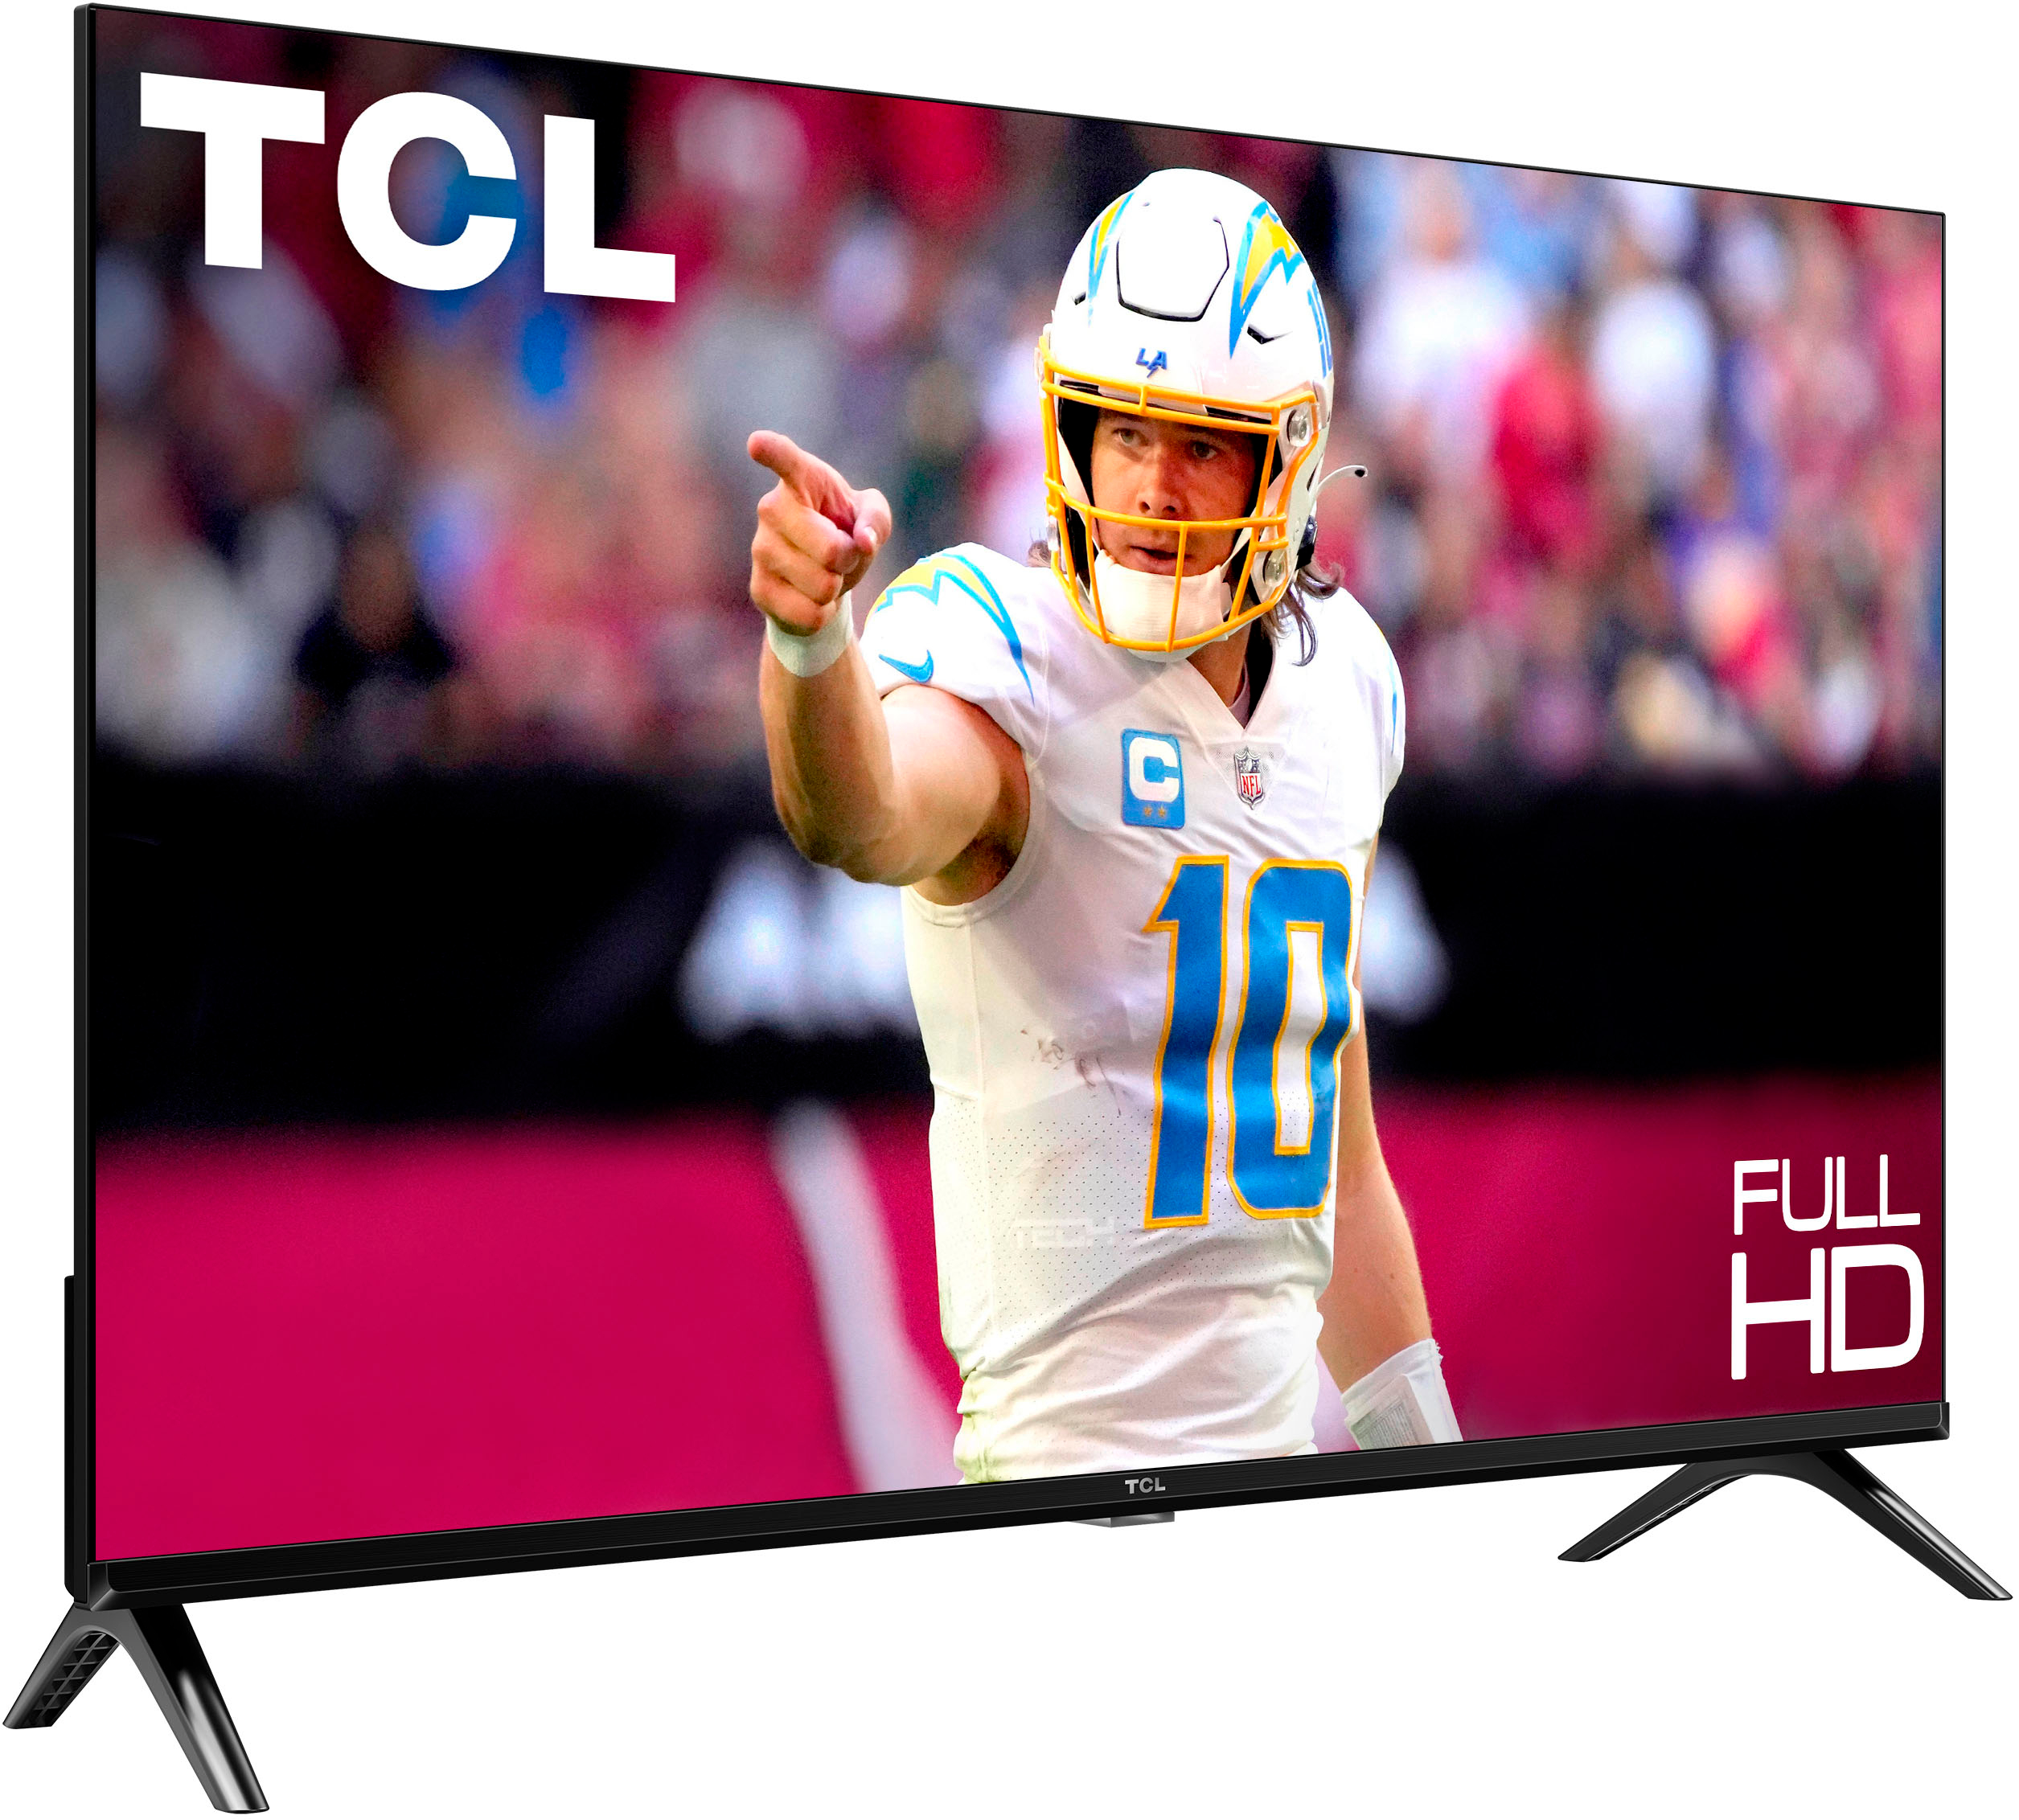 Angle View: TCL - 40" Class S3 S-Class LED Full HD Smart TV with Google TV